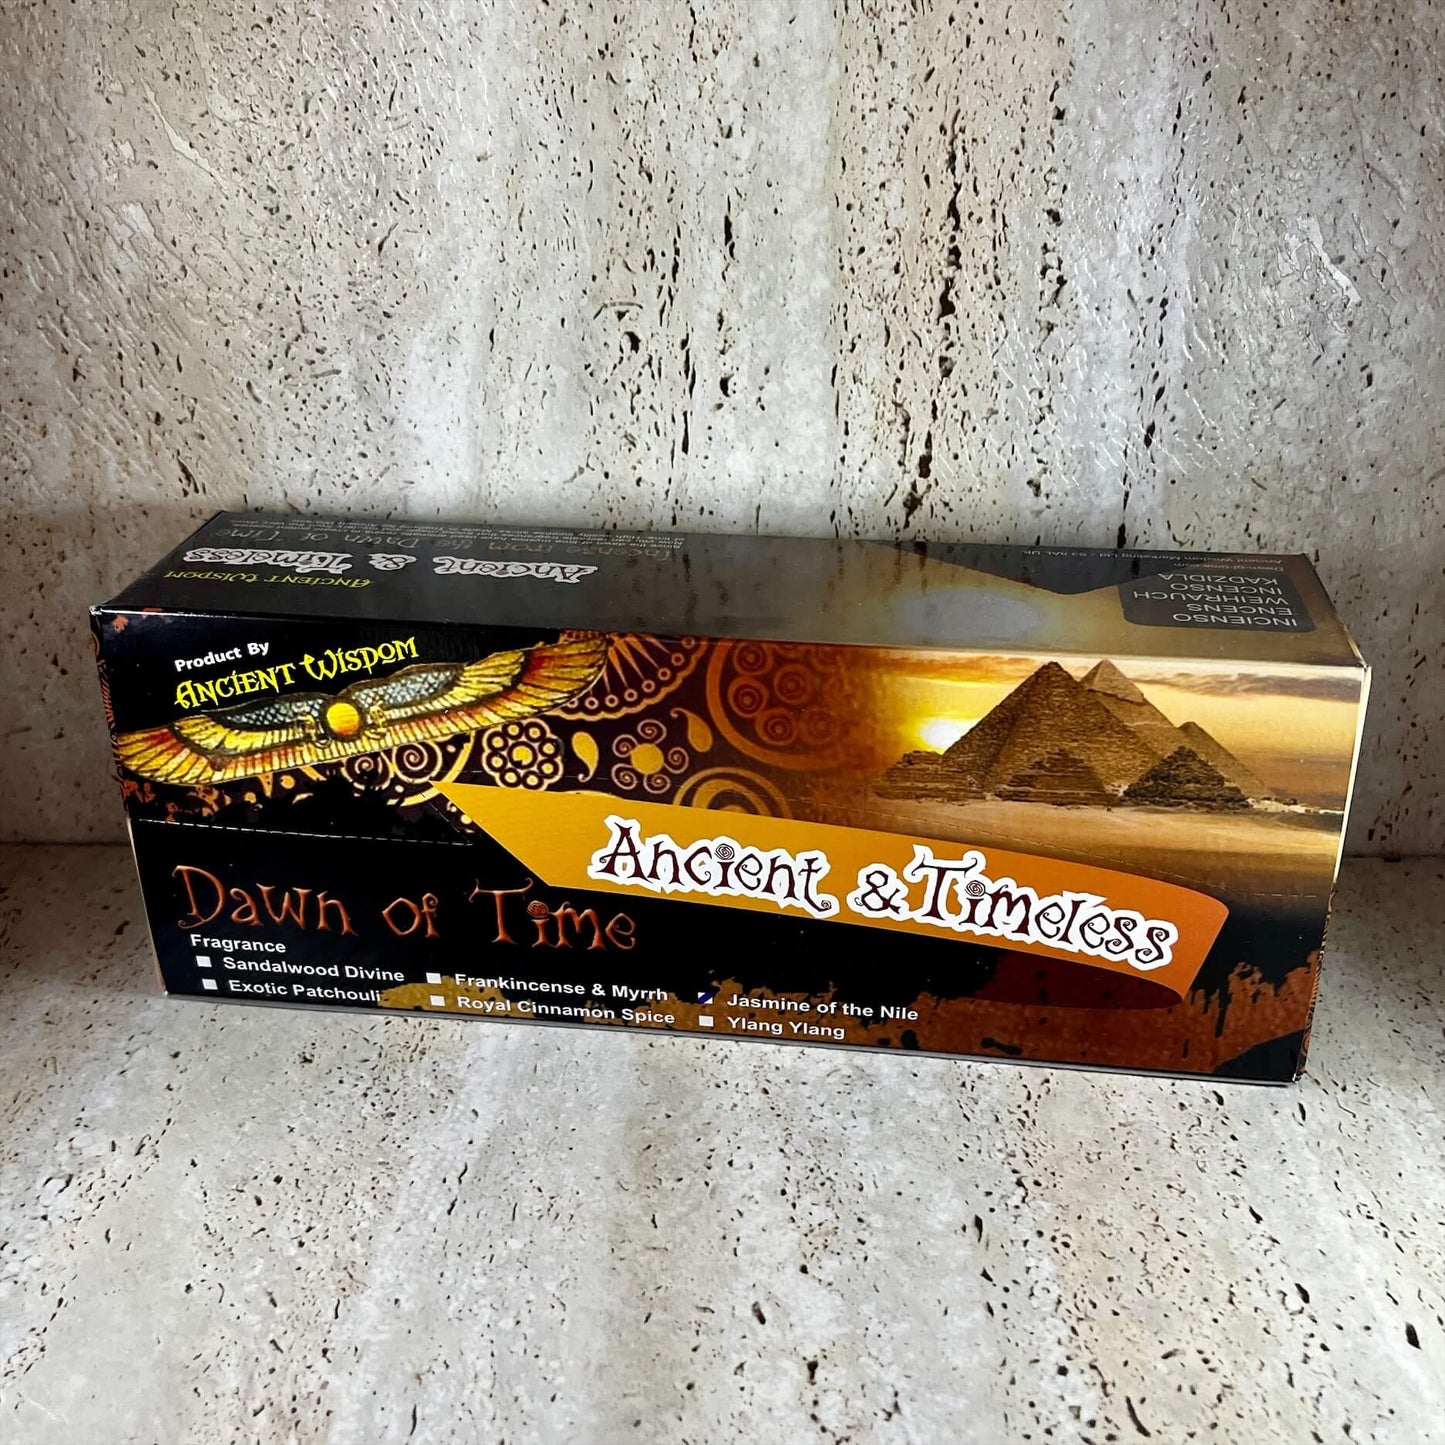 Dawn of Time Frankincense and Myrrh incense